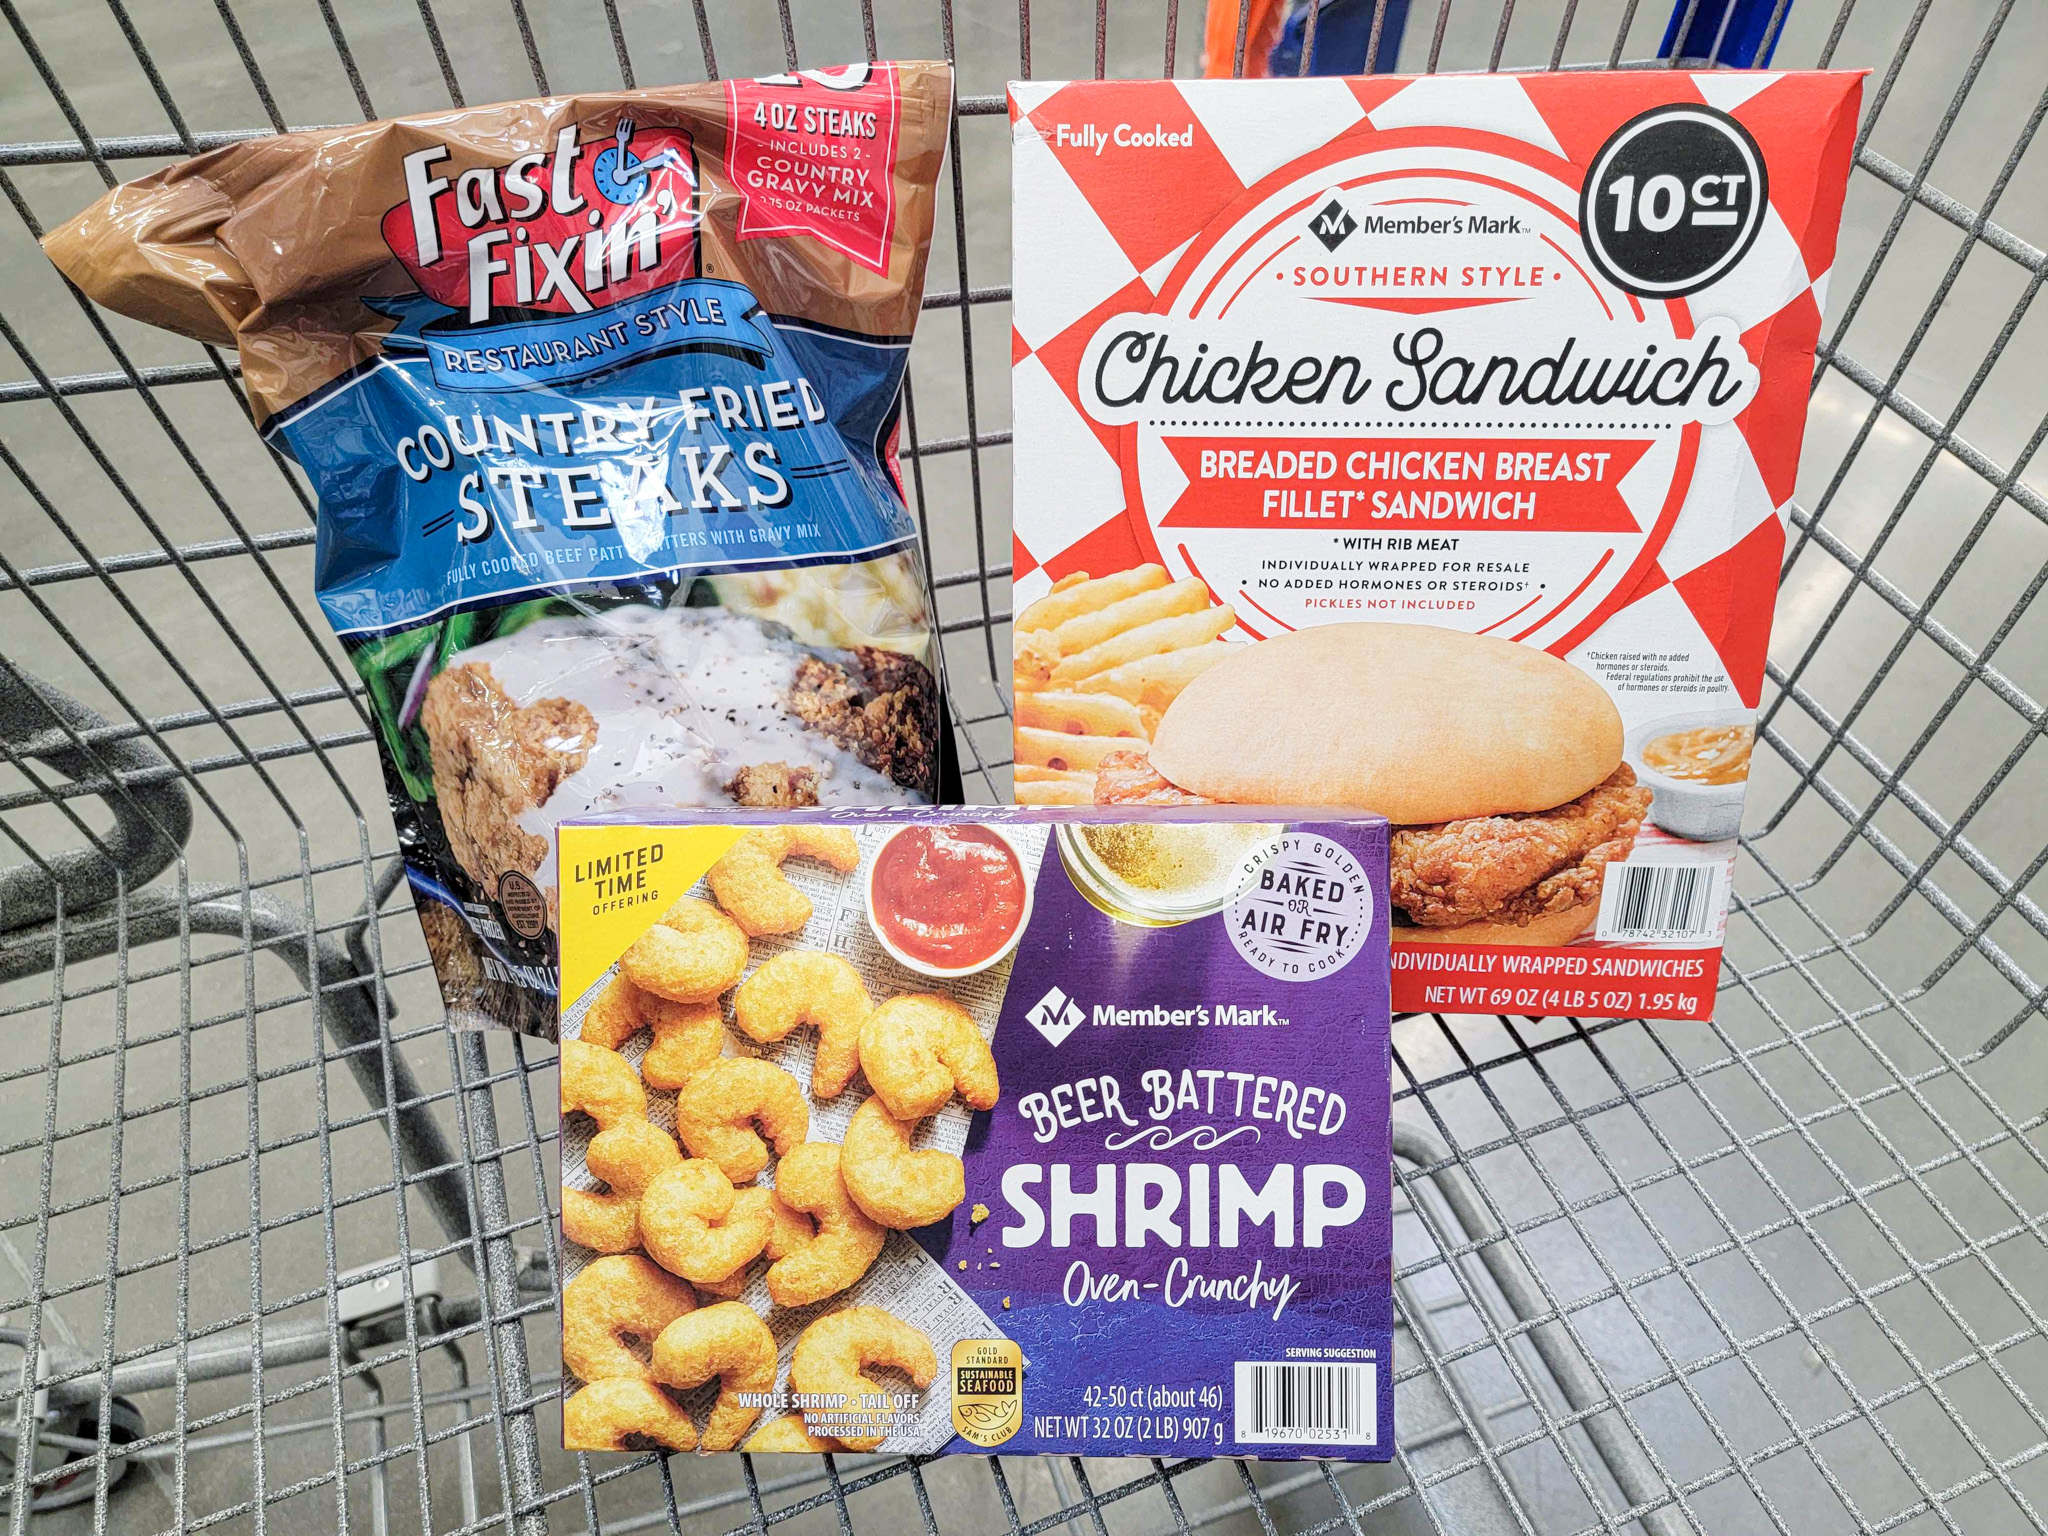 Save on Easy Dinner Solutions at Sam's Club - The Krazy Coupon Lady